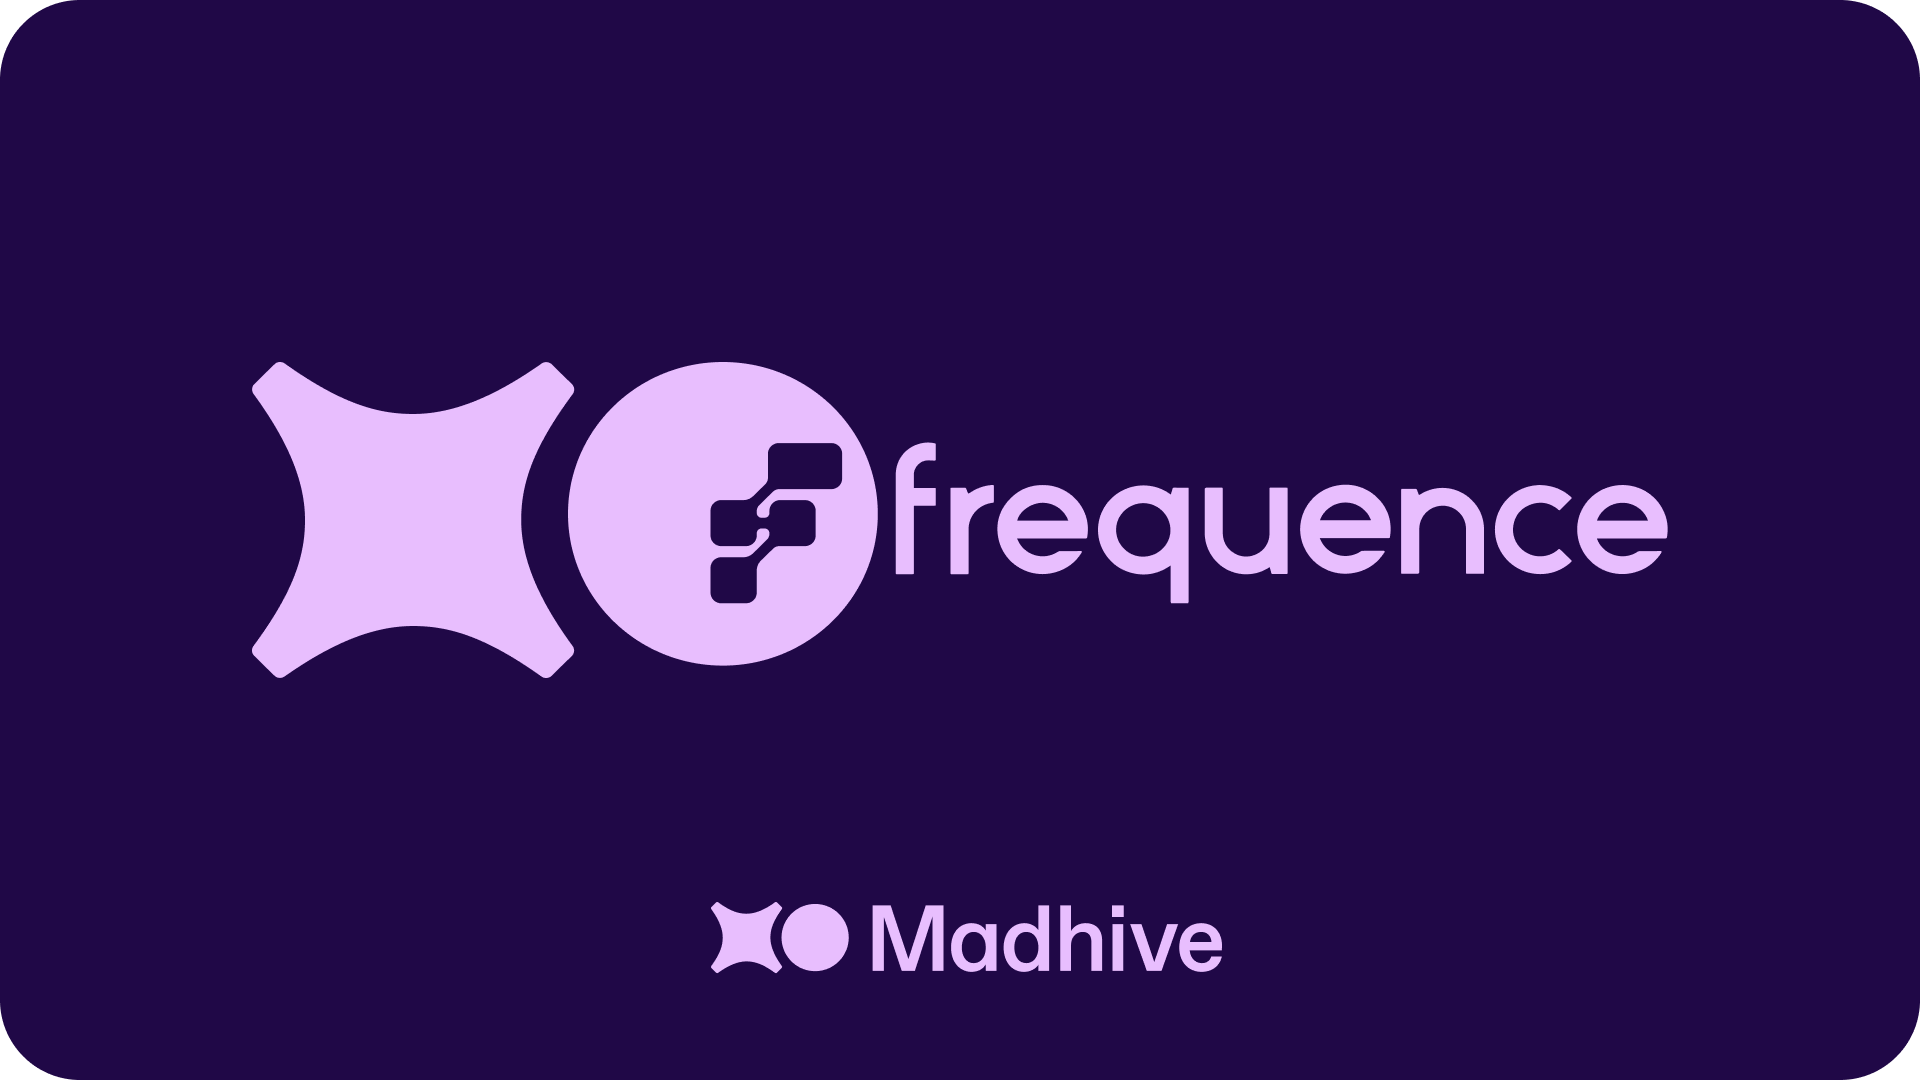 Why Madhive is acquiring Frequence